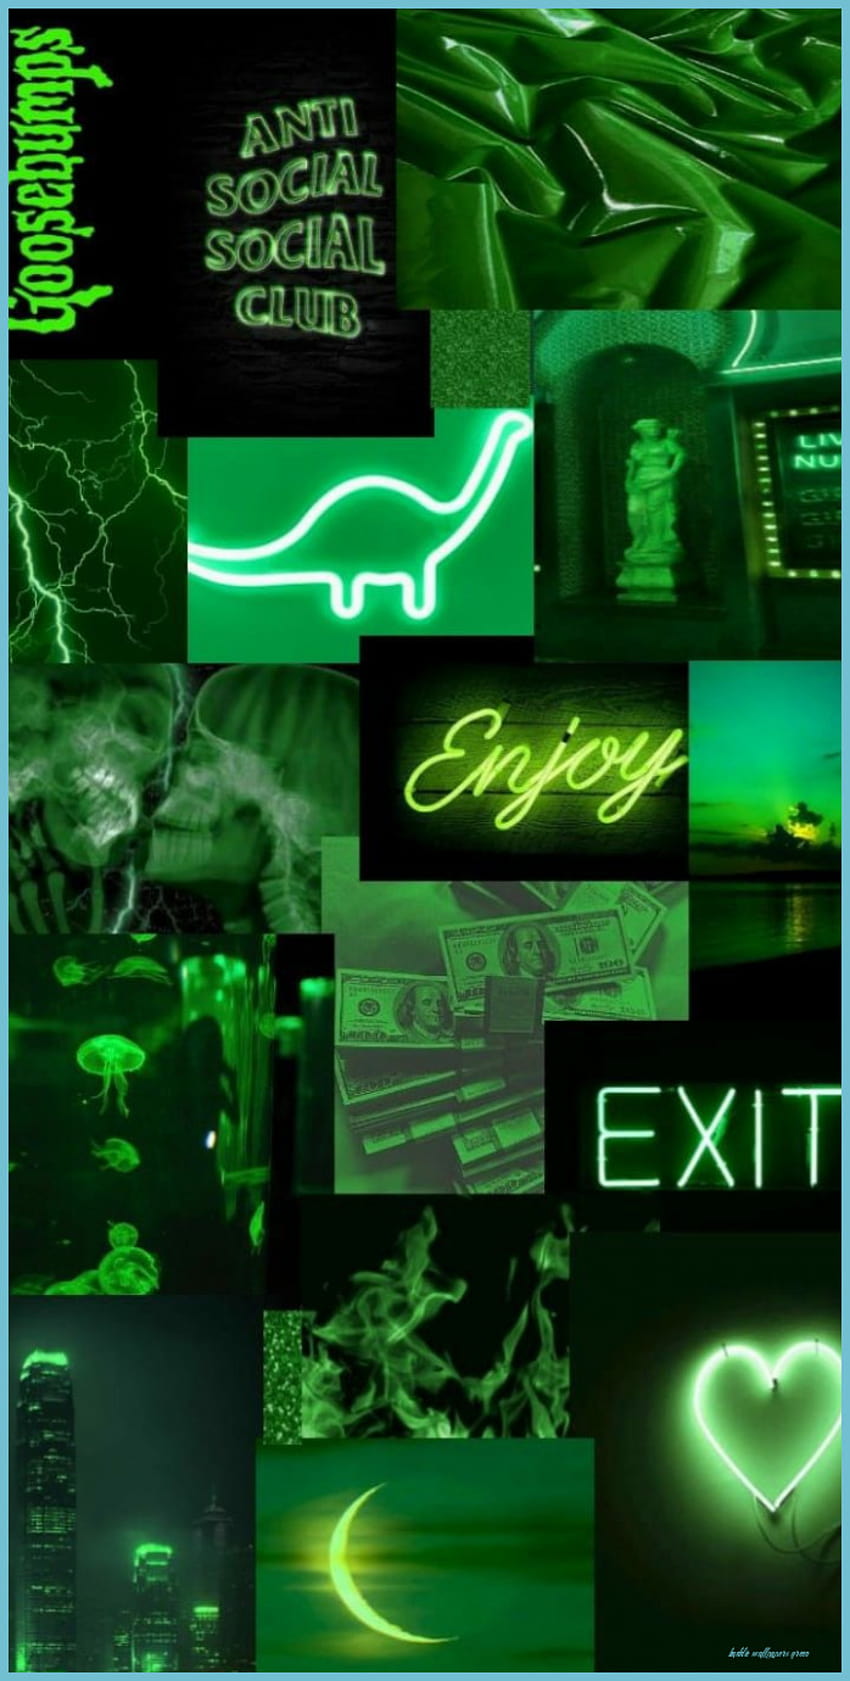 A collage of green images with the word exit - Lime green, neon green